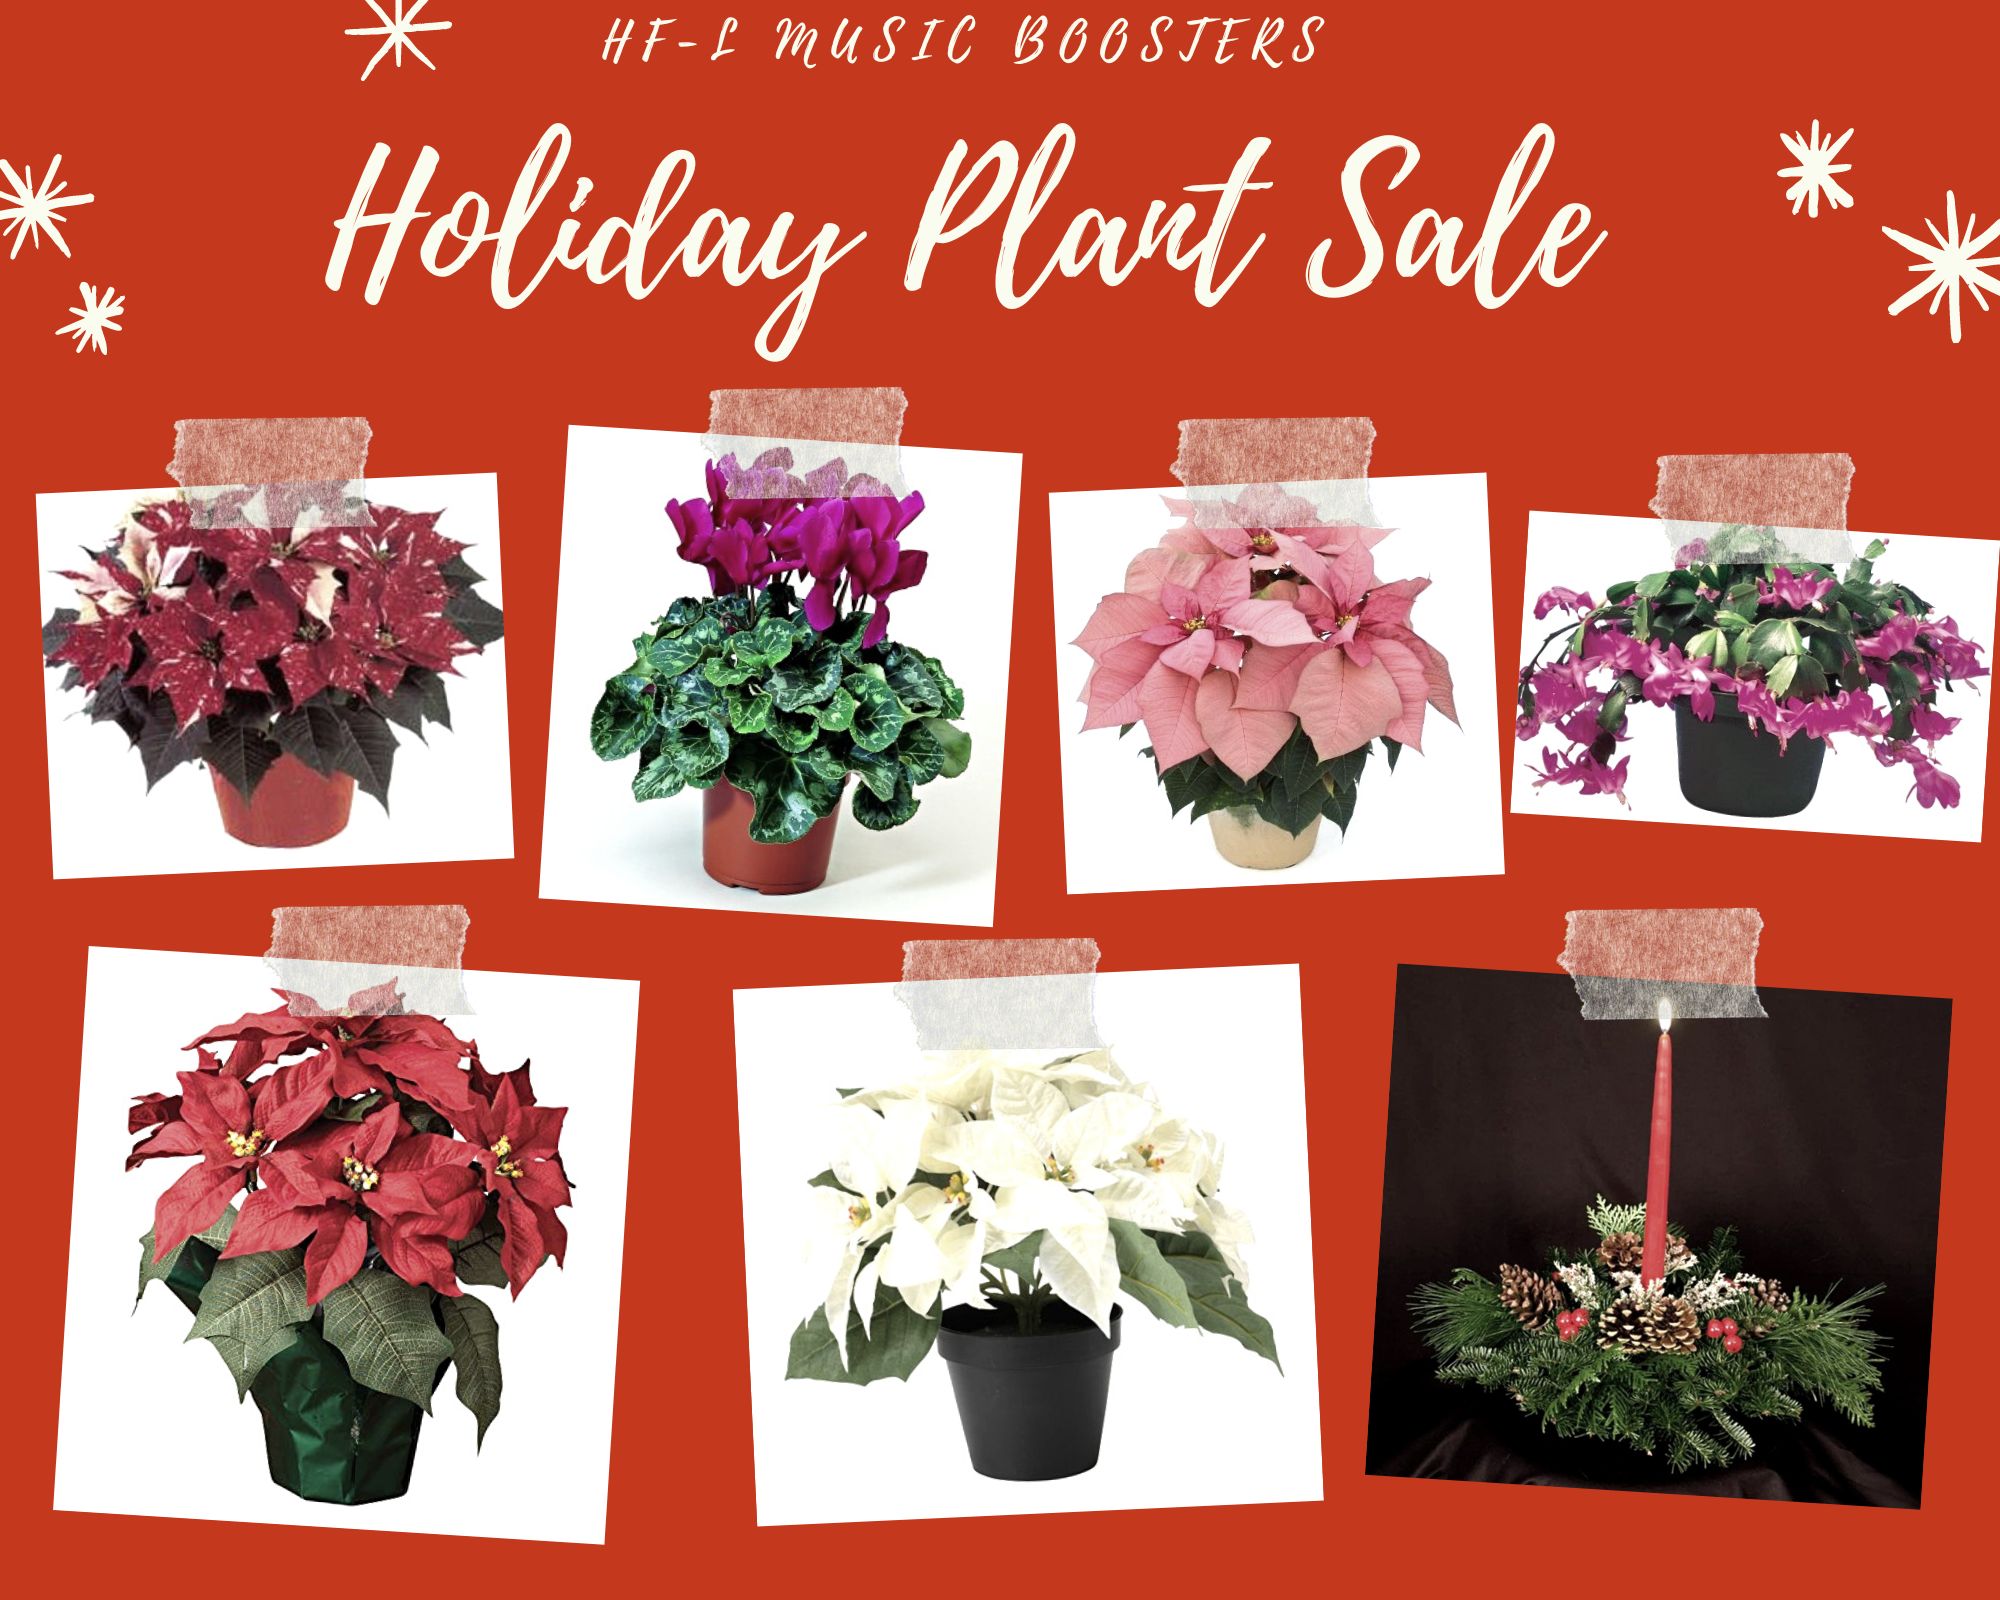 music boosters holiday plant sale